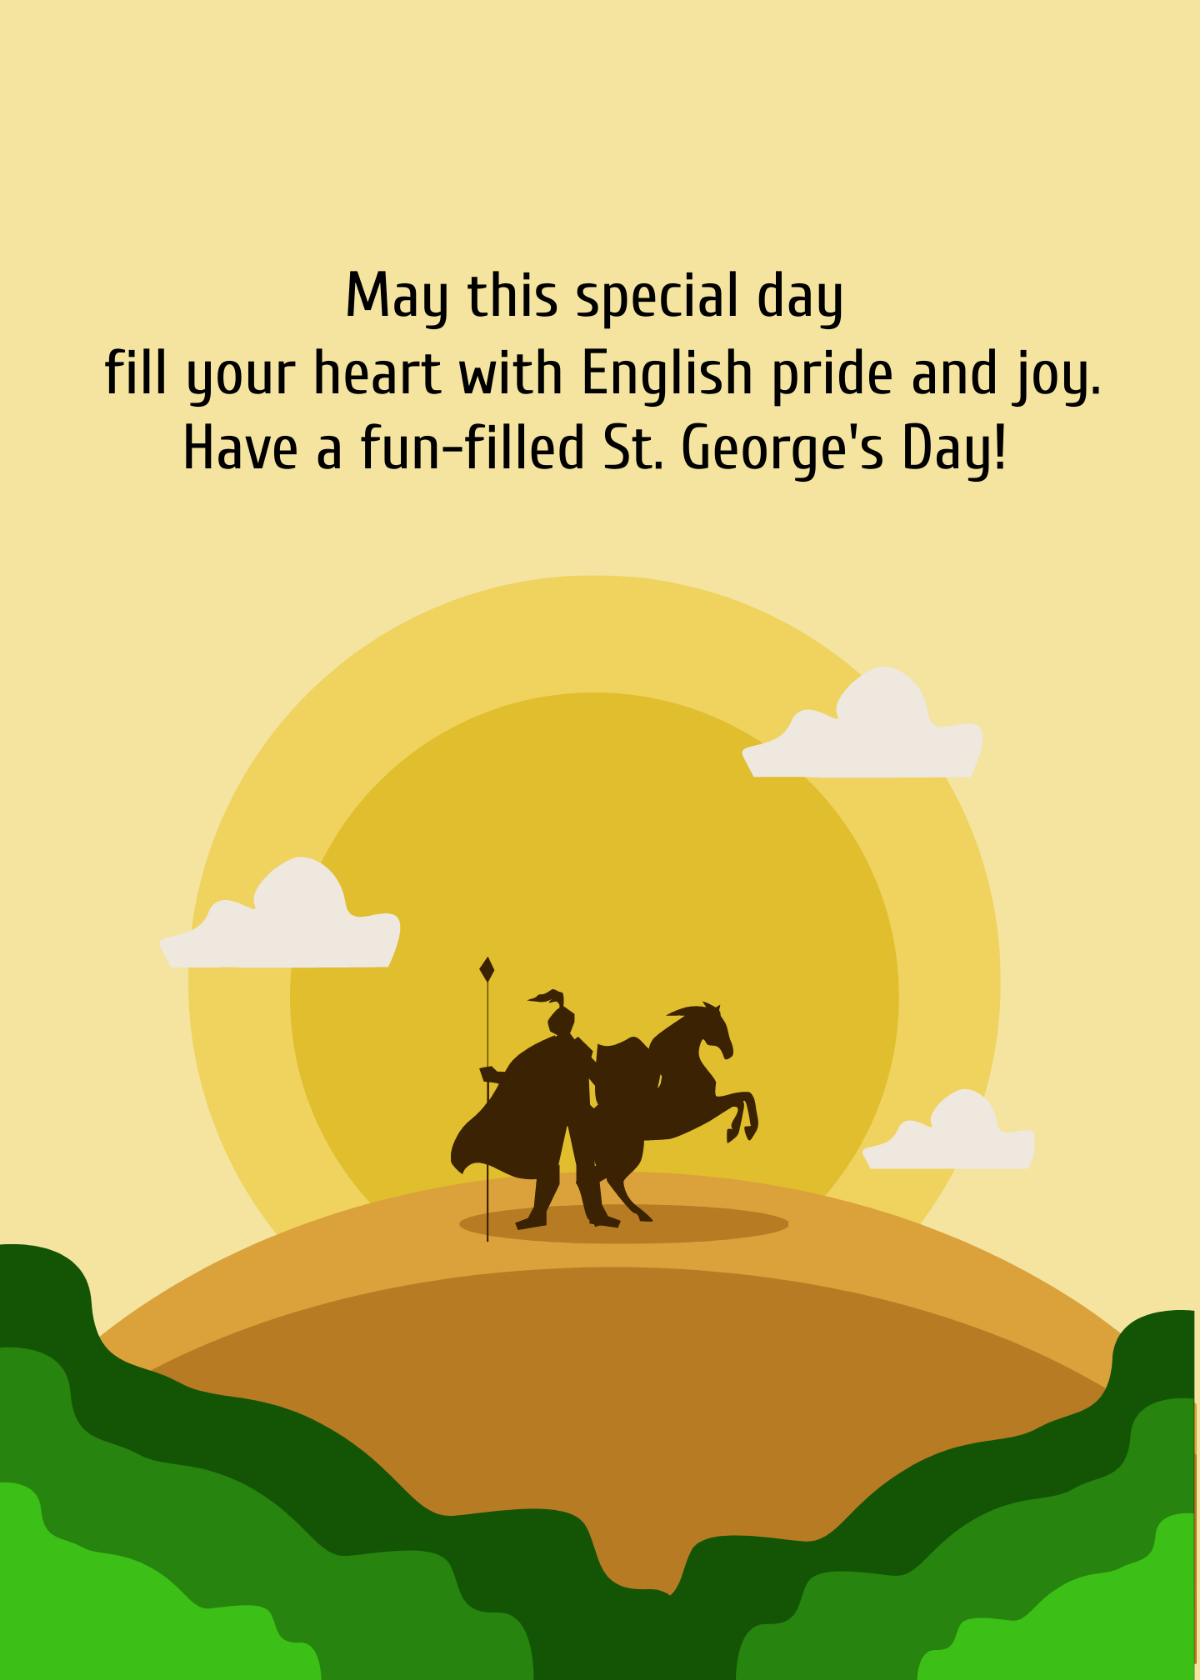 Free St. George's Day Greeting Card Template